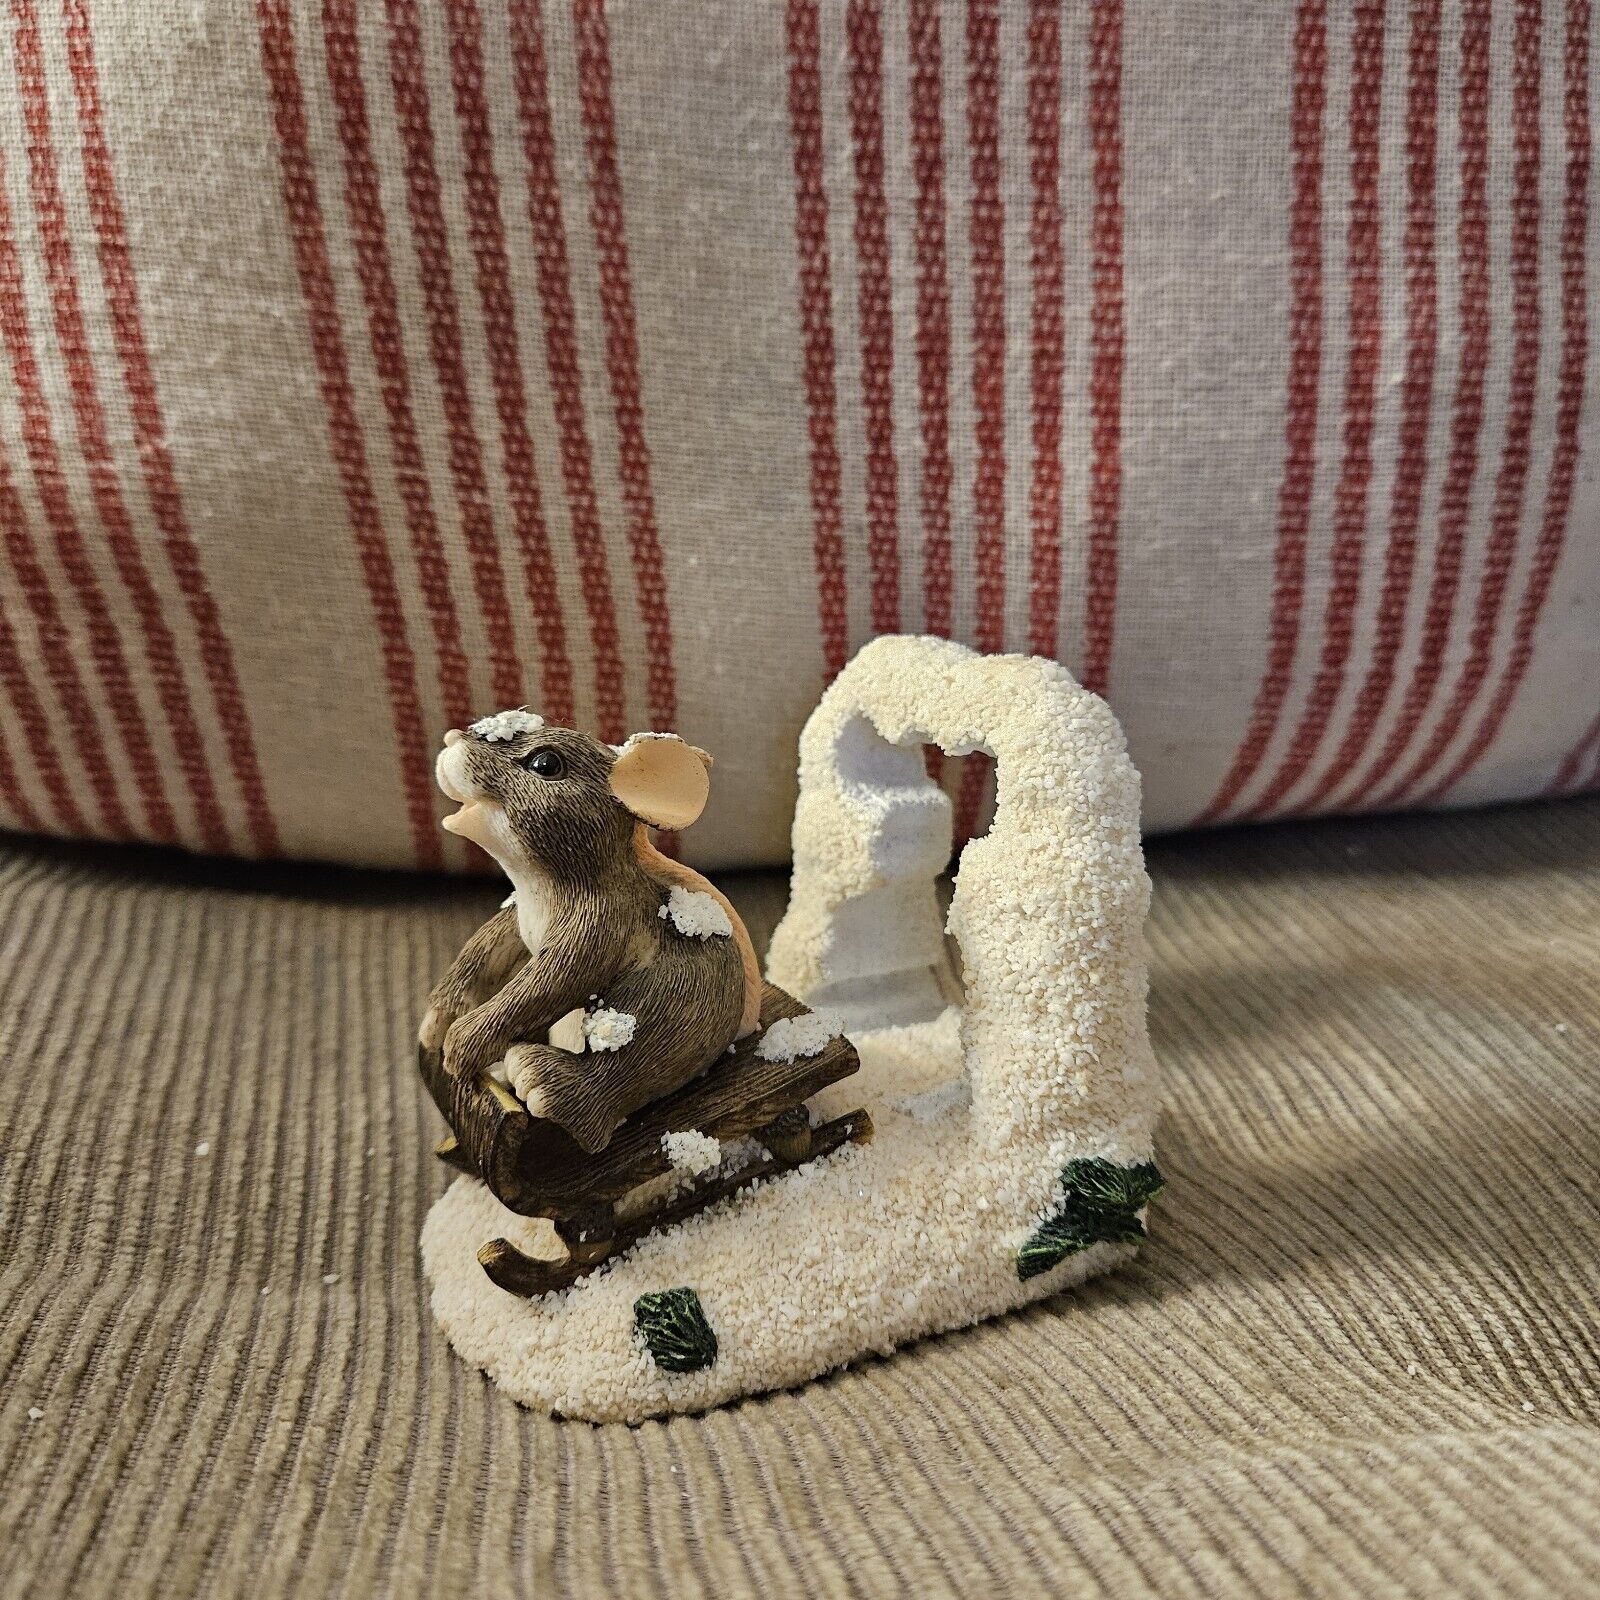 Charming Tails Figurine Dashing Through The Snow Mouse On Sled Fitz & Floyd 